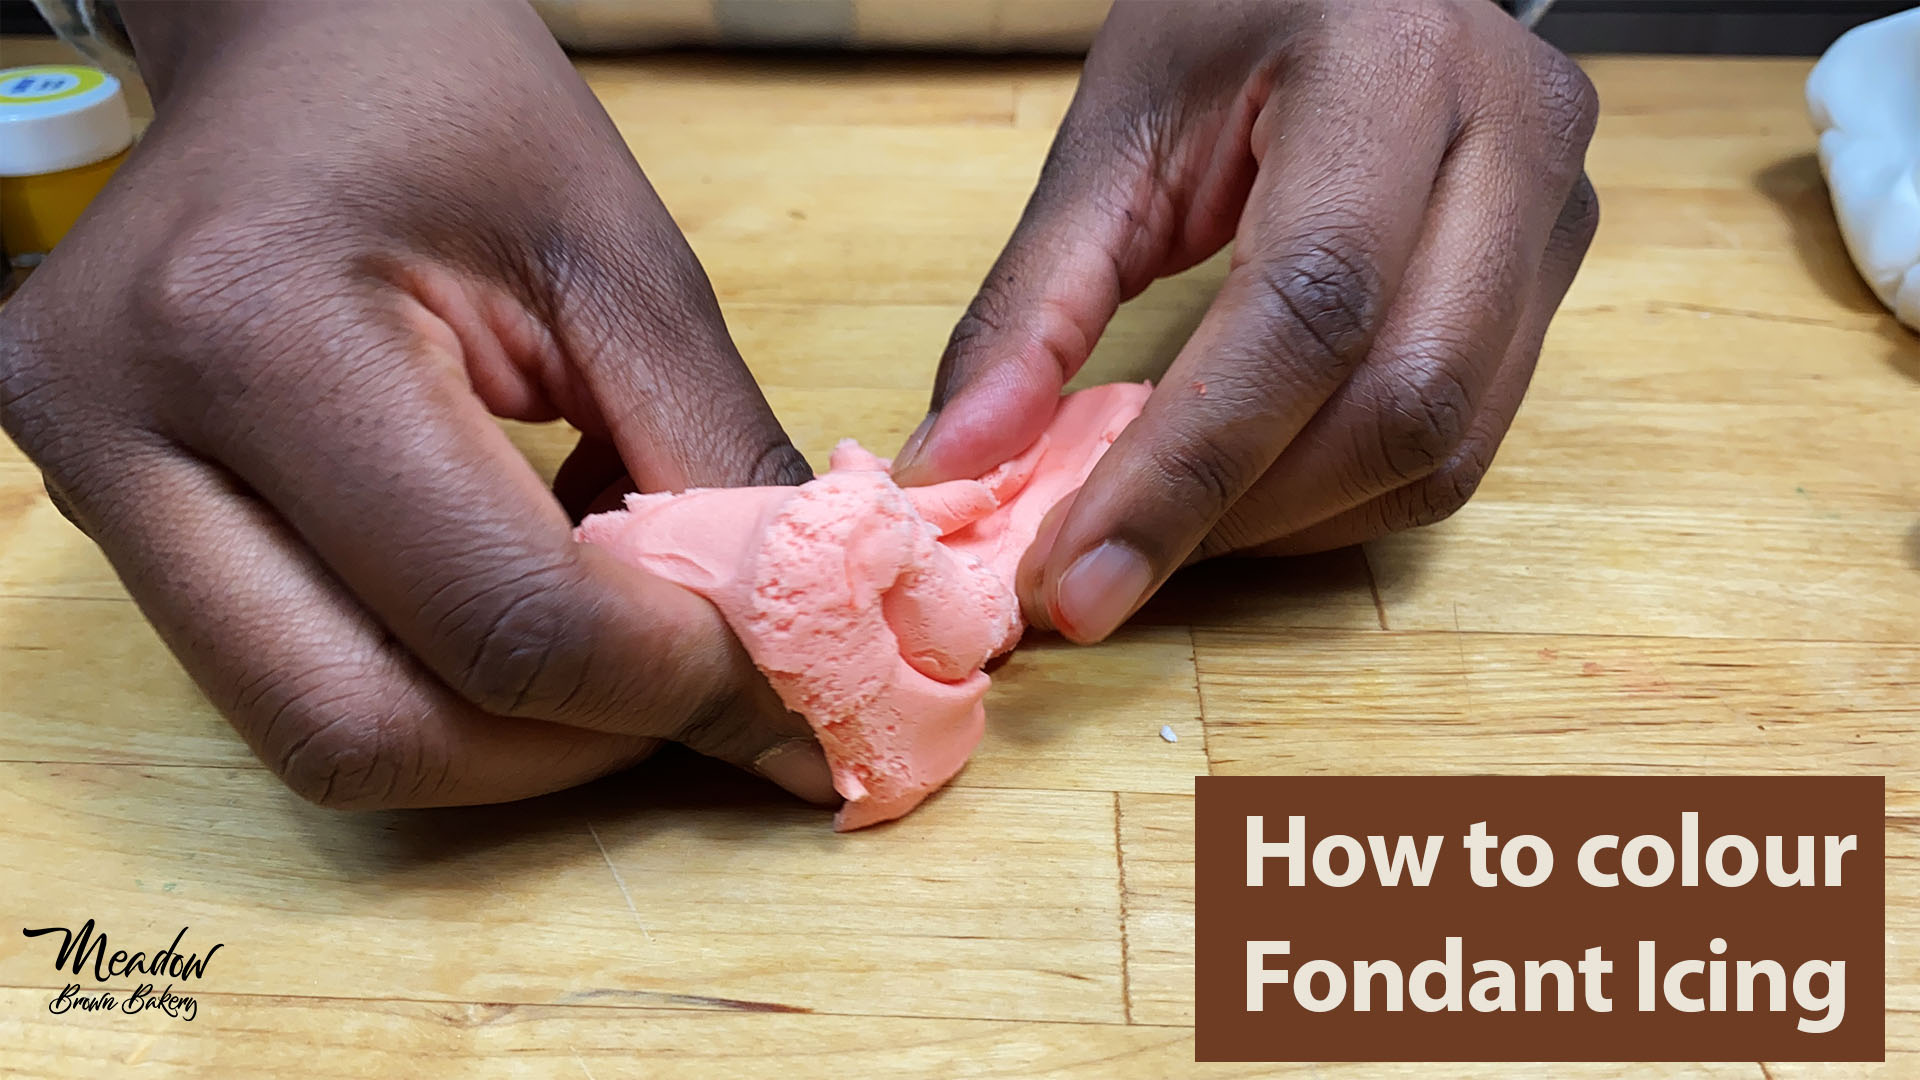 How to colour fondant icing